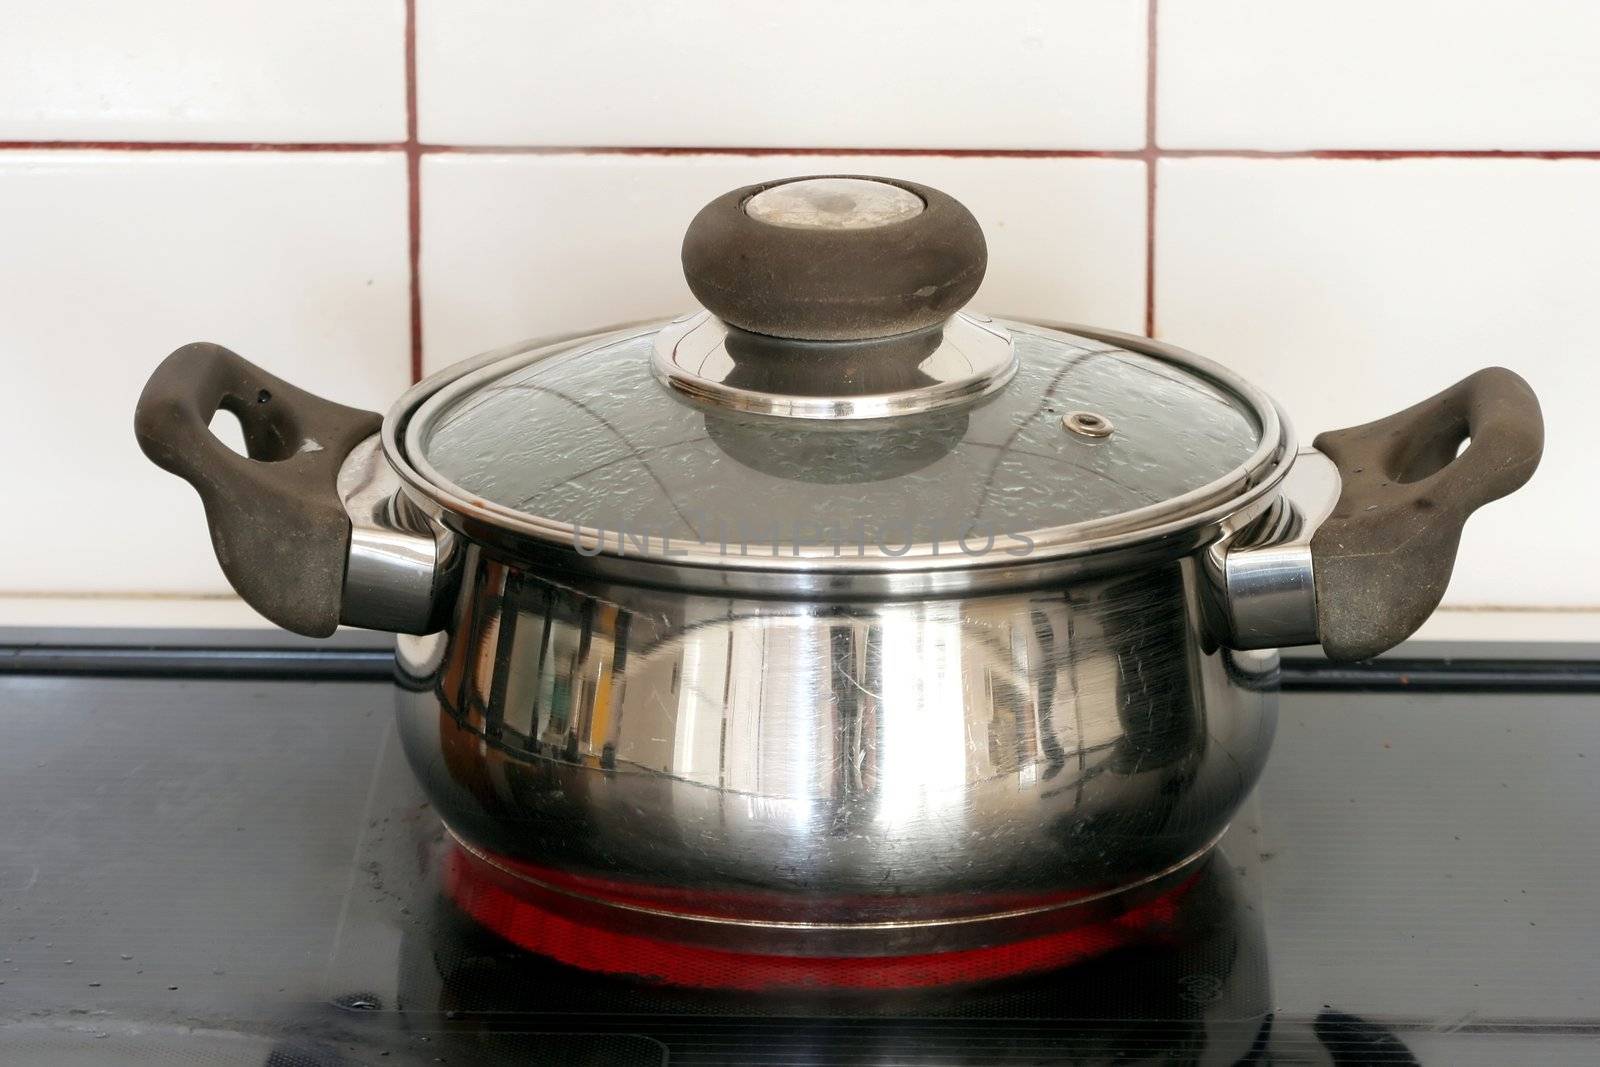 Stainless steel pot on a hot plate of a stove